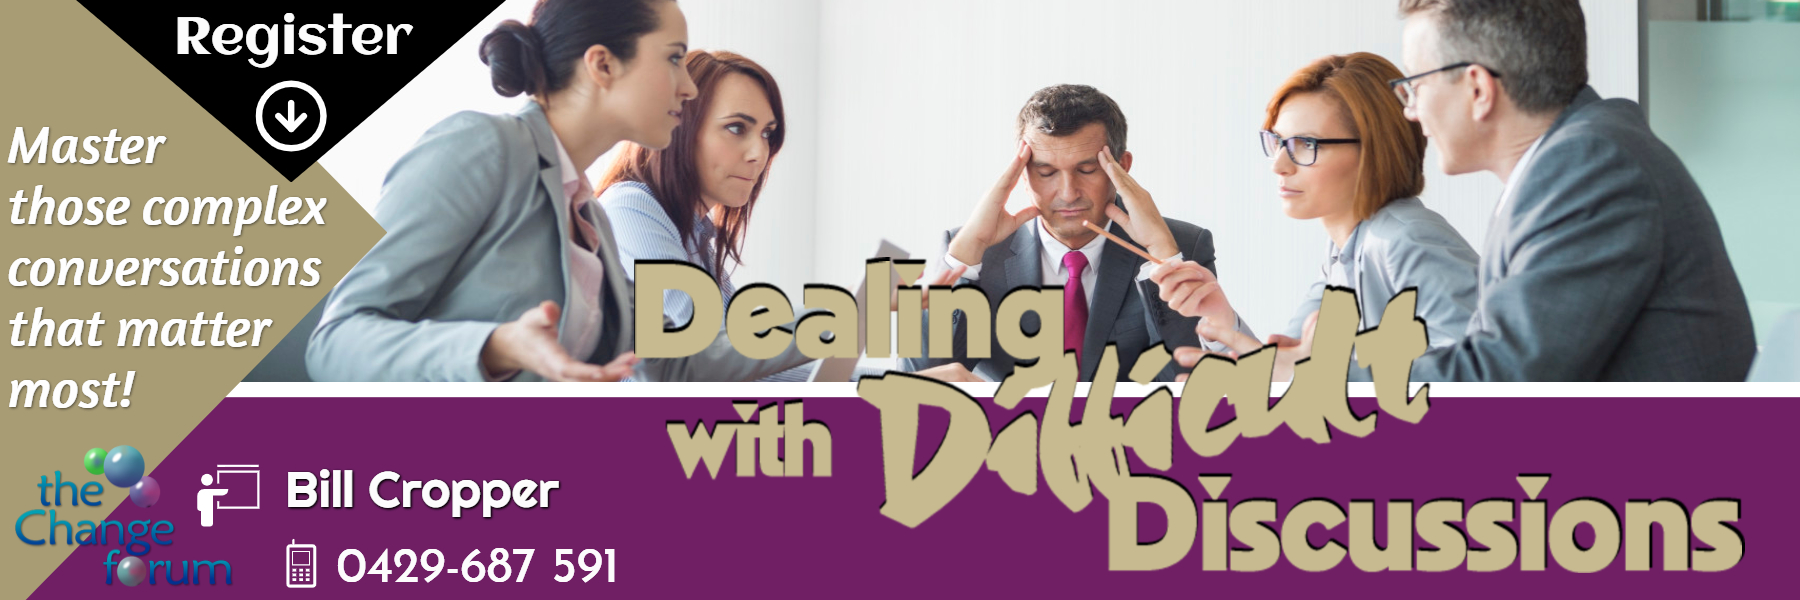 Dealing with Difficult Discussions